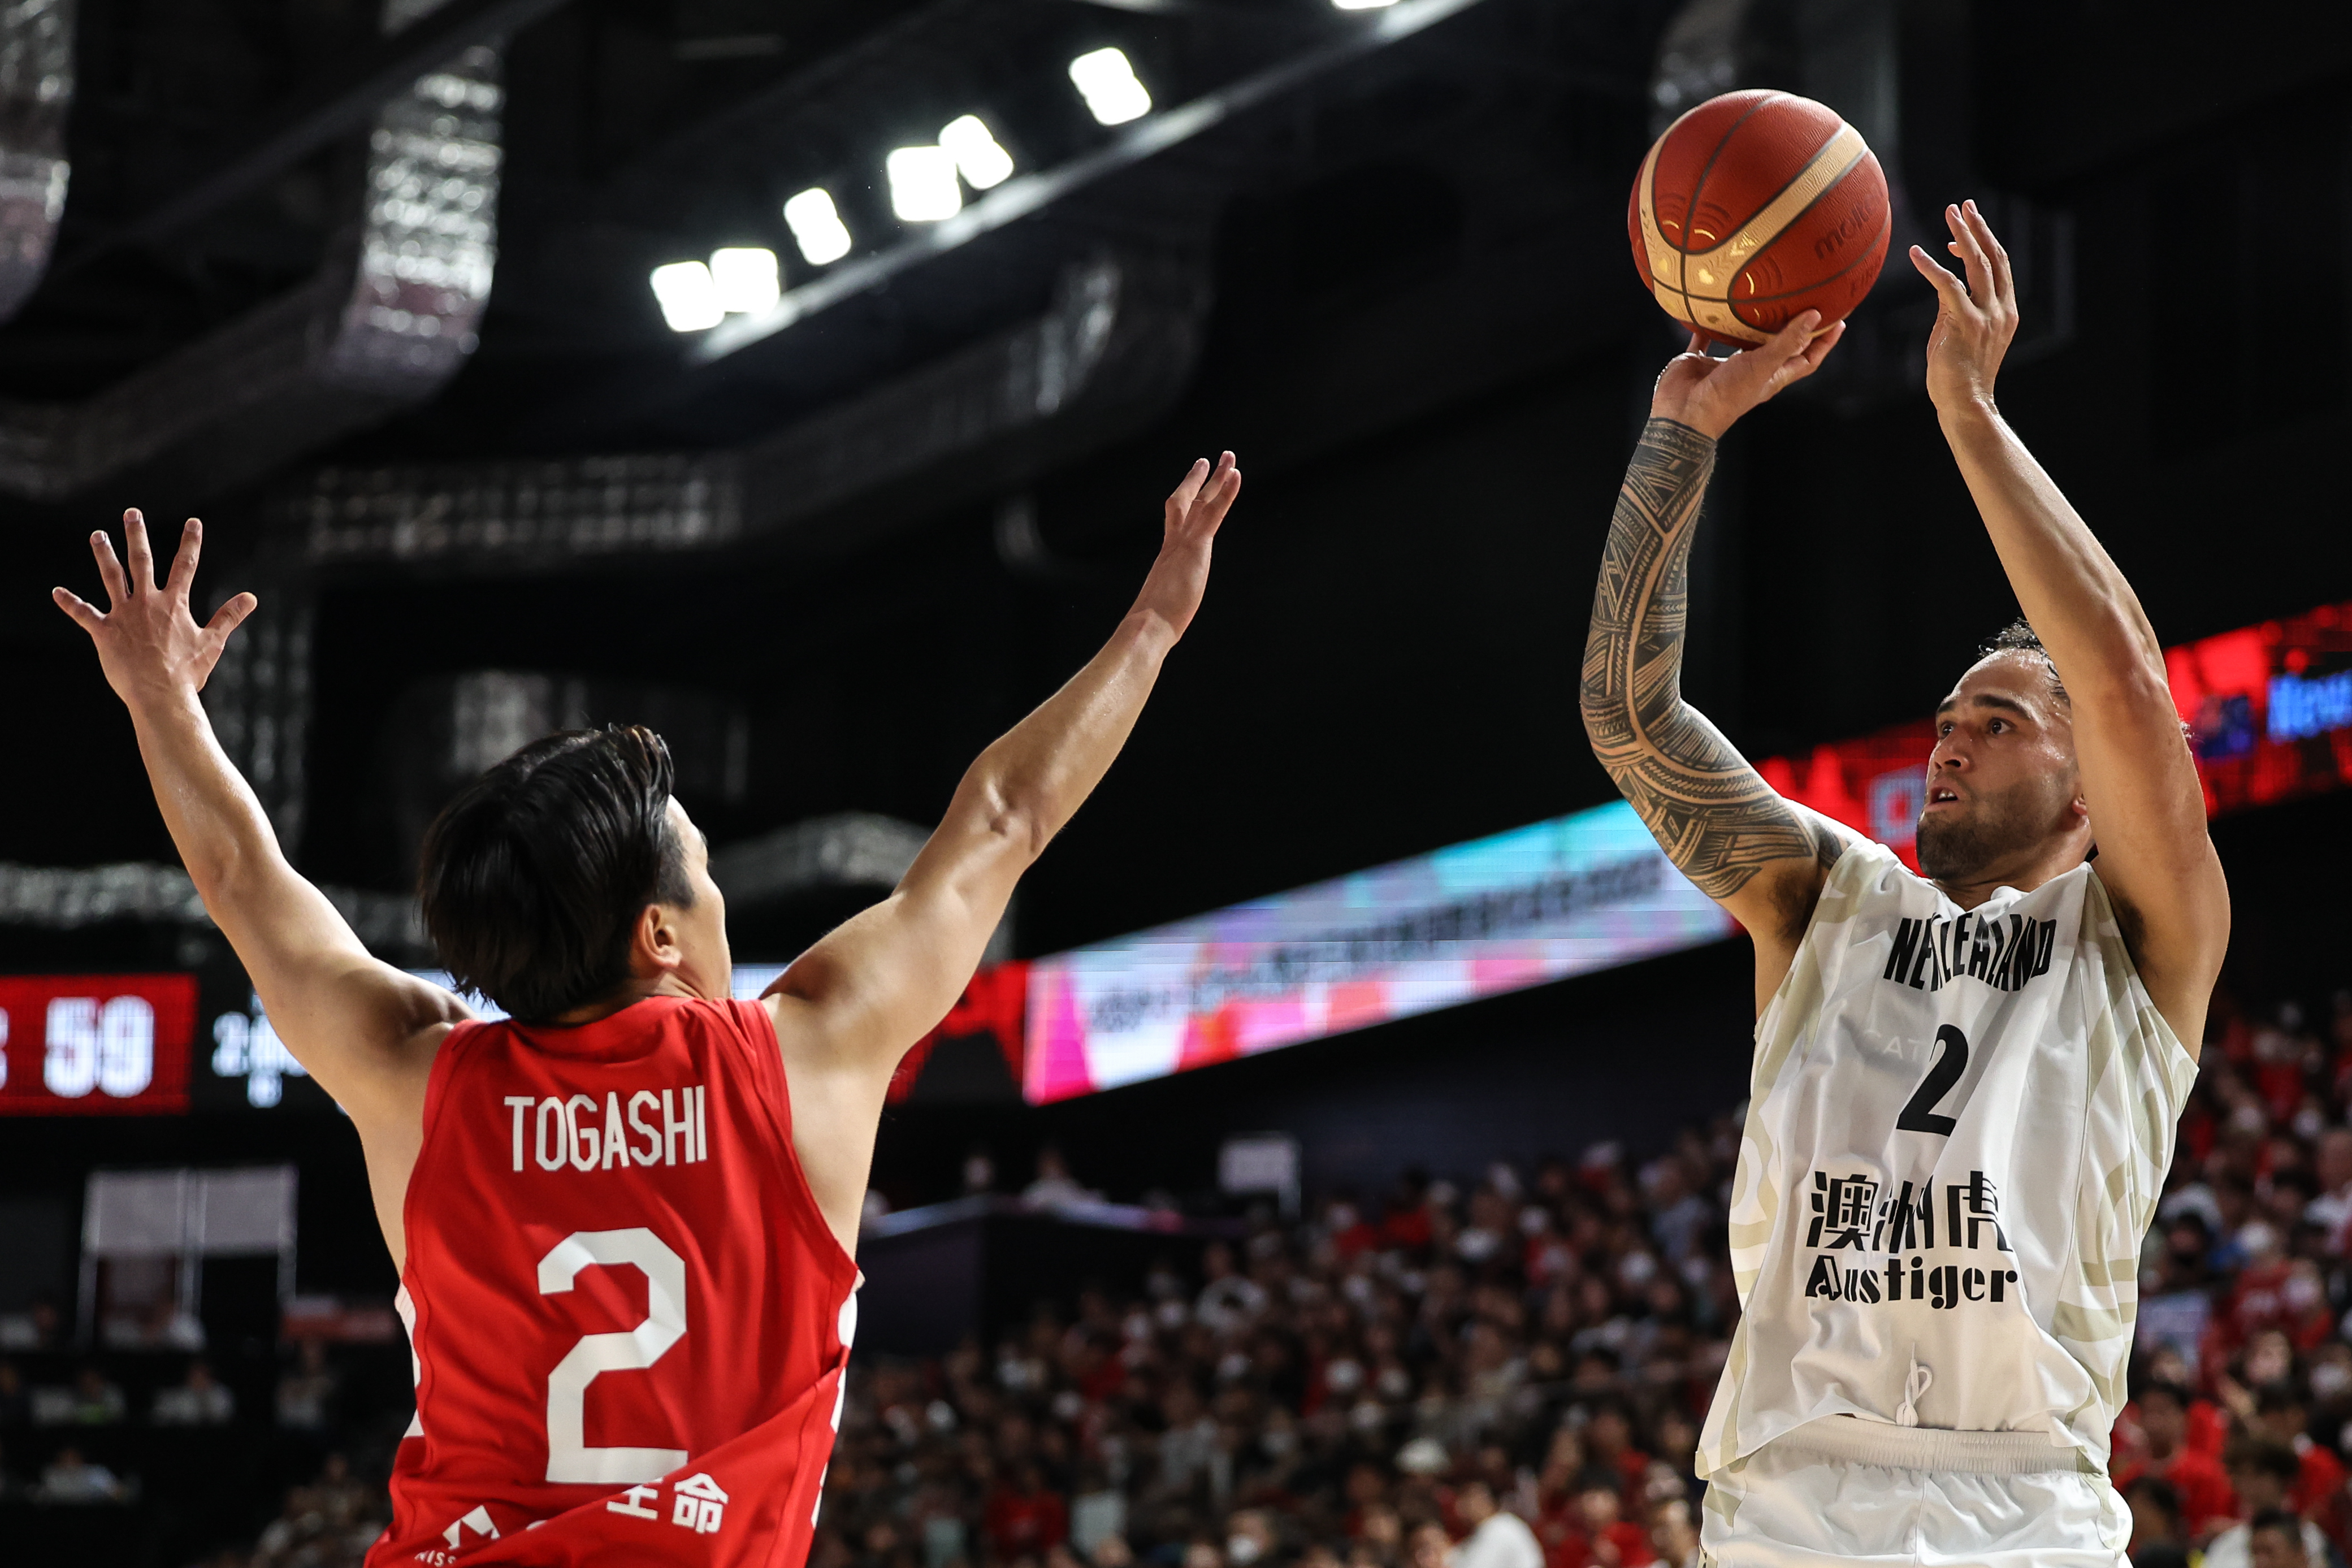 FIBA Basketball World Cup 2023: Everything you need to know